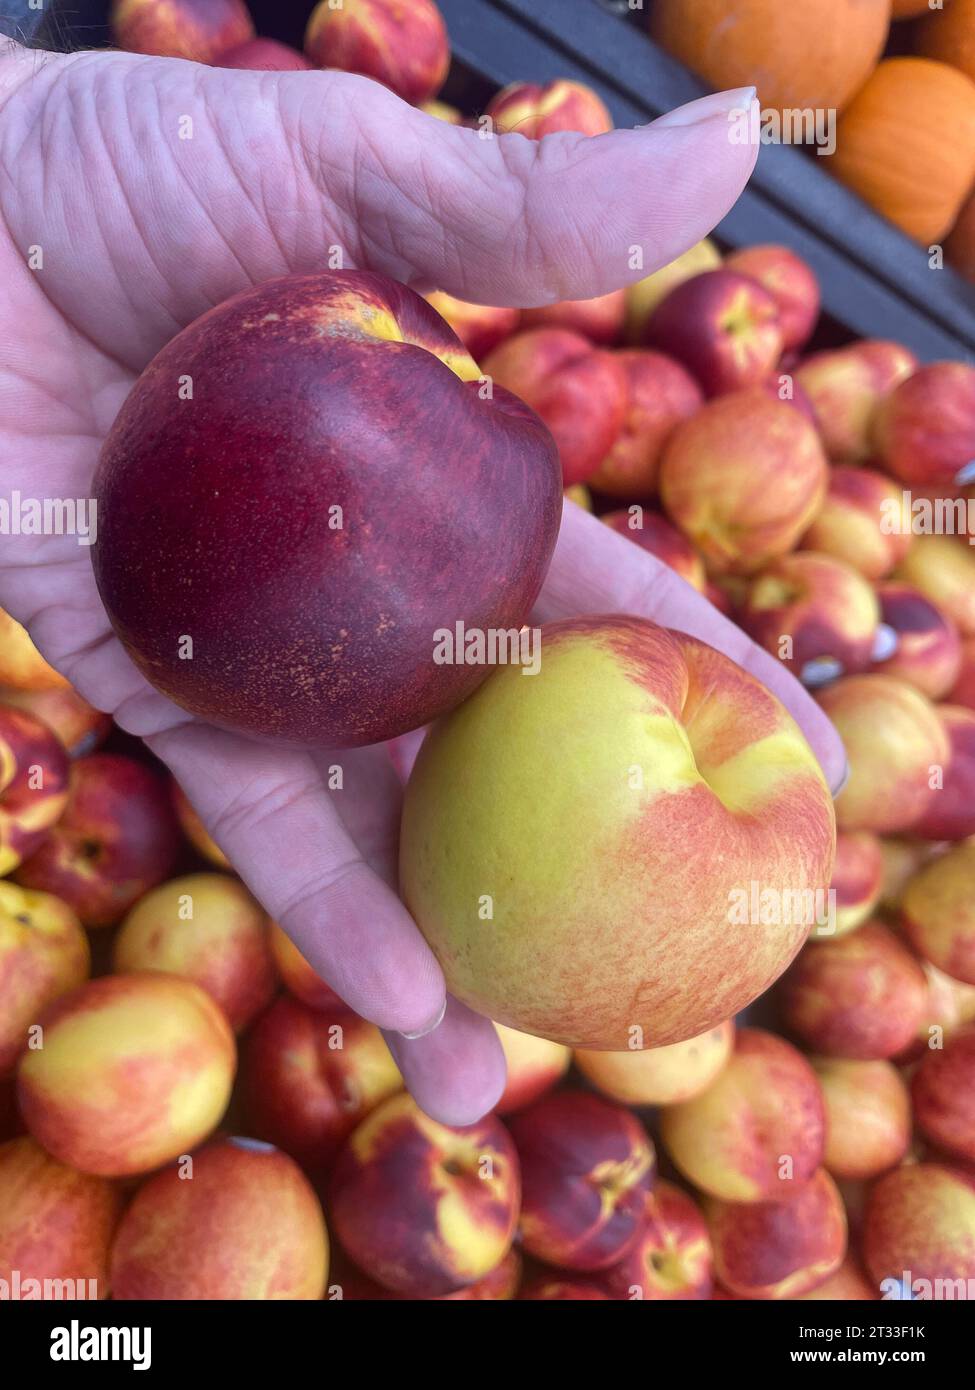 Hand holding Georgia Peaches on display in a grocery store Stock Photo